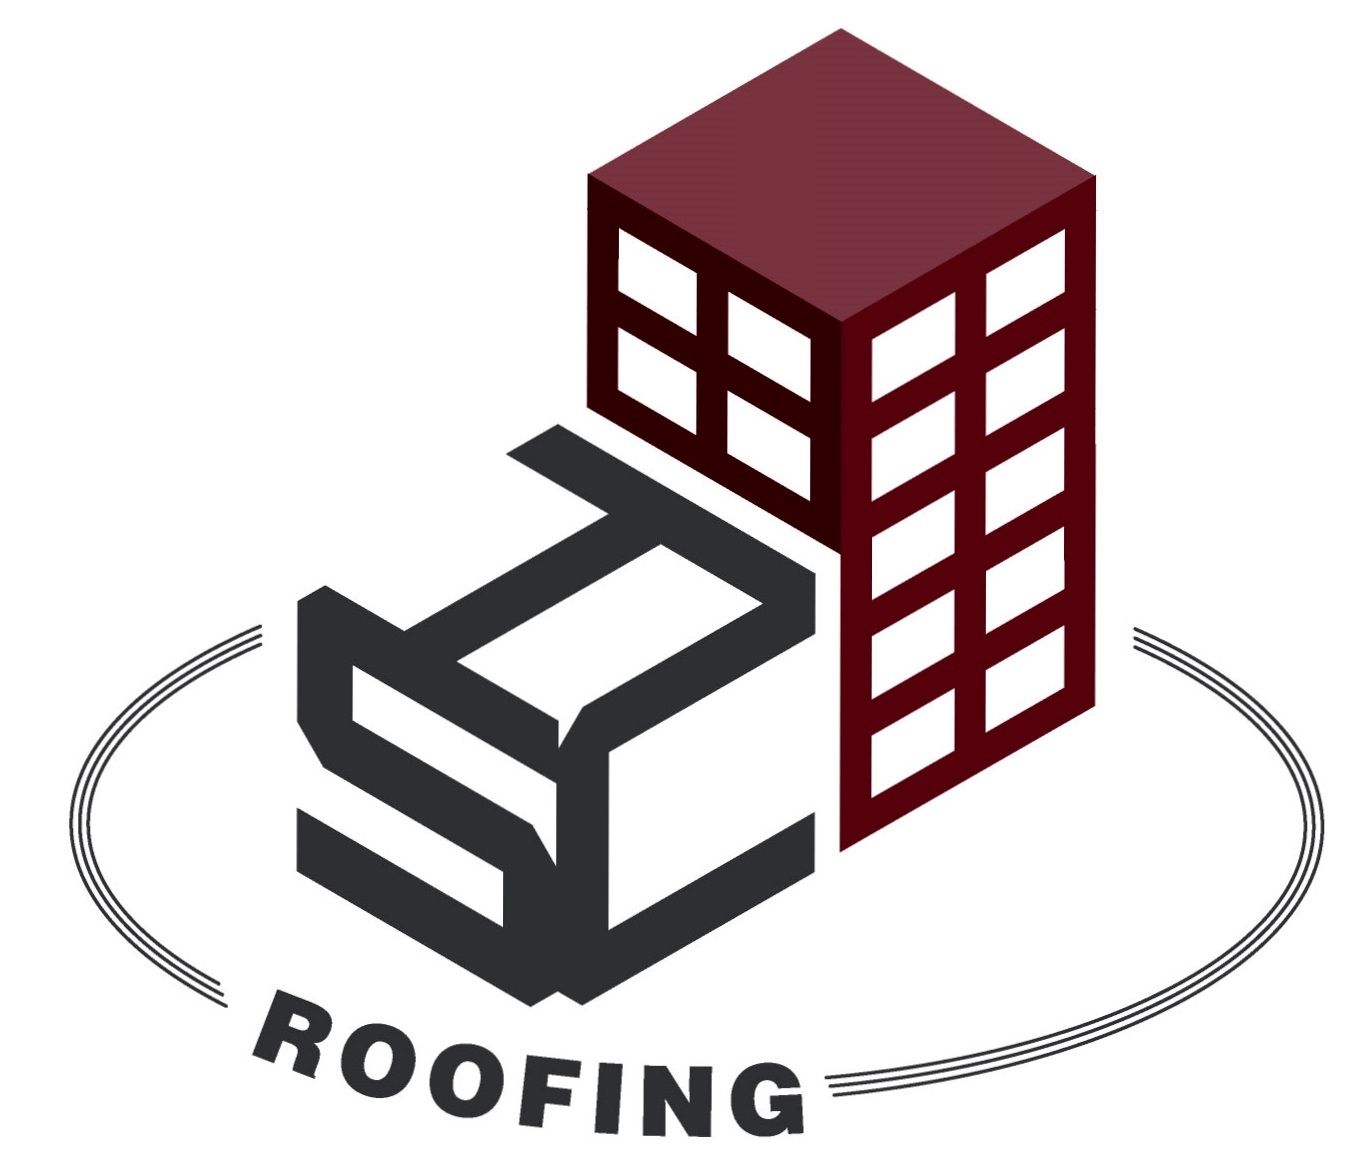 Tri-State Commercial Roofing Corp